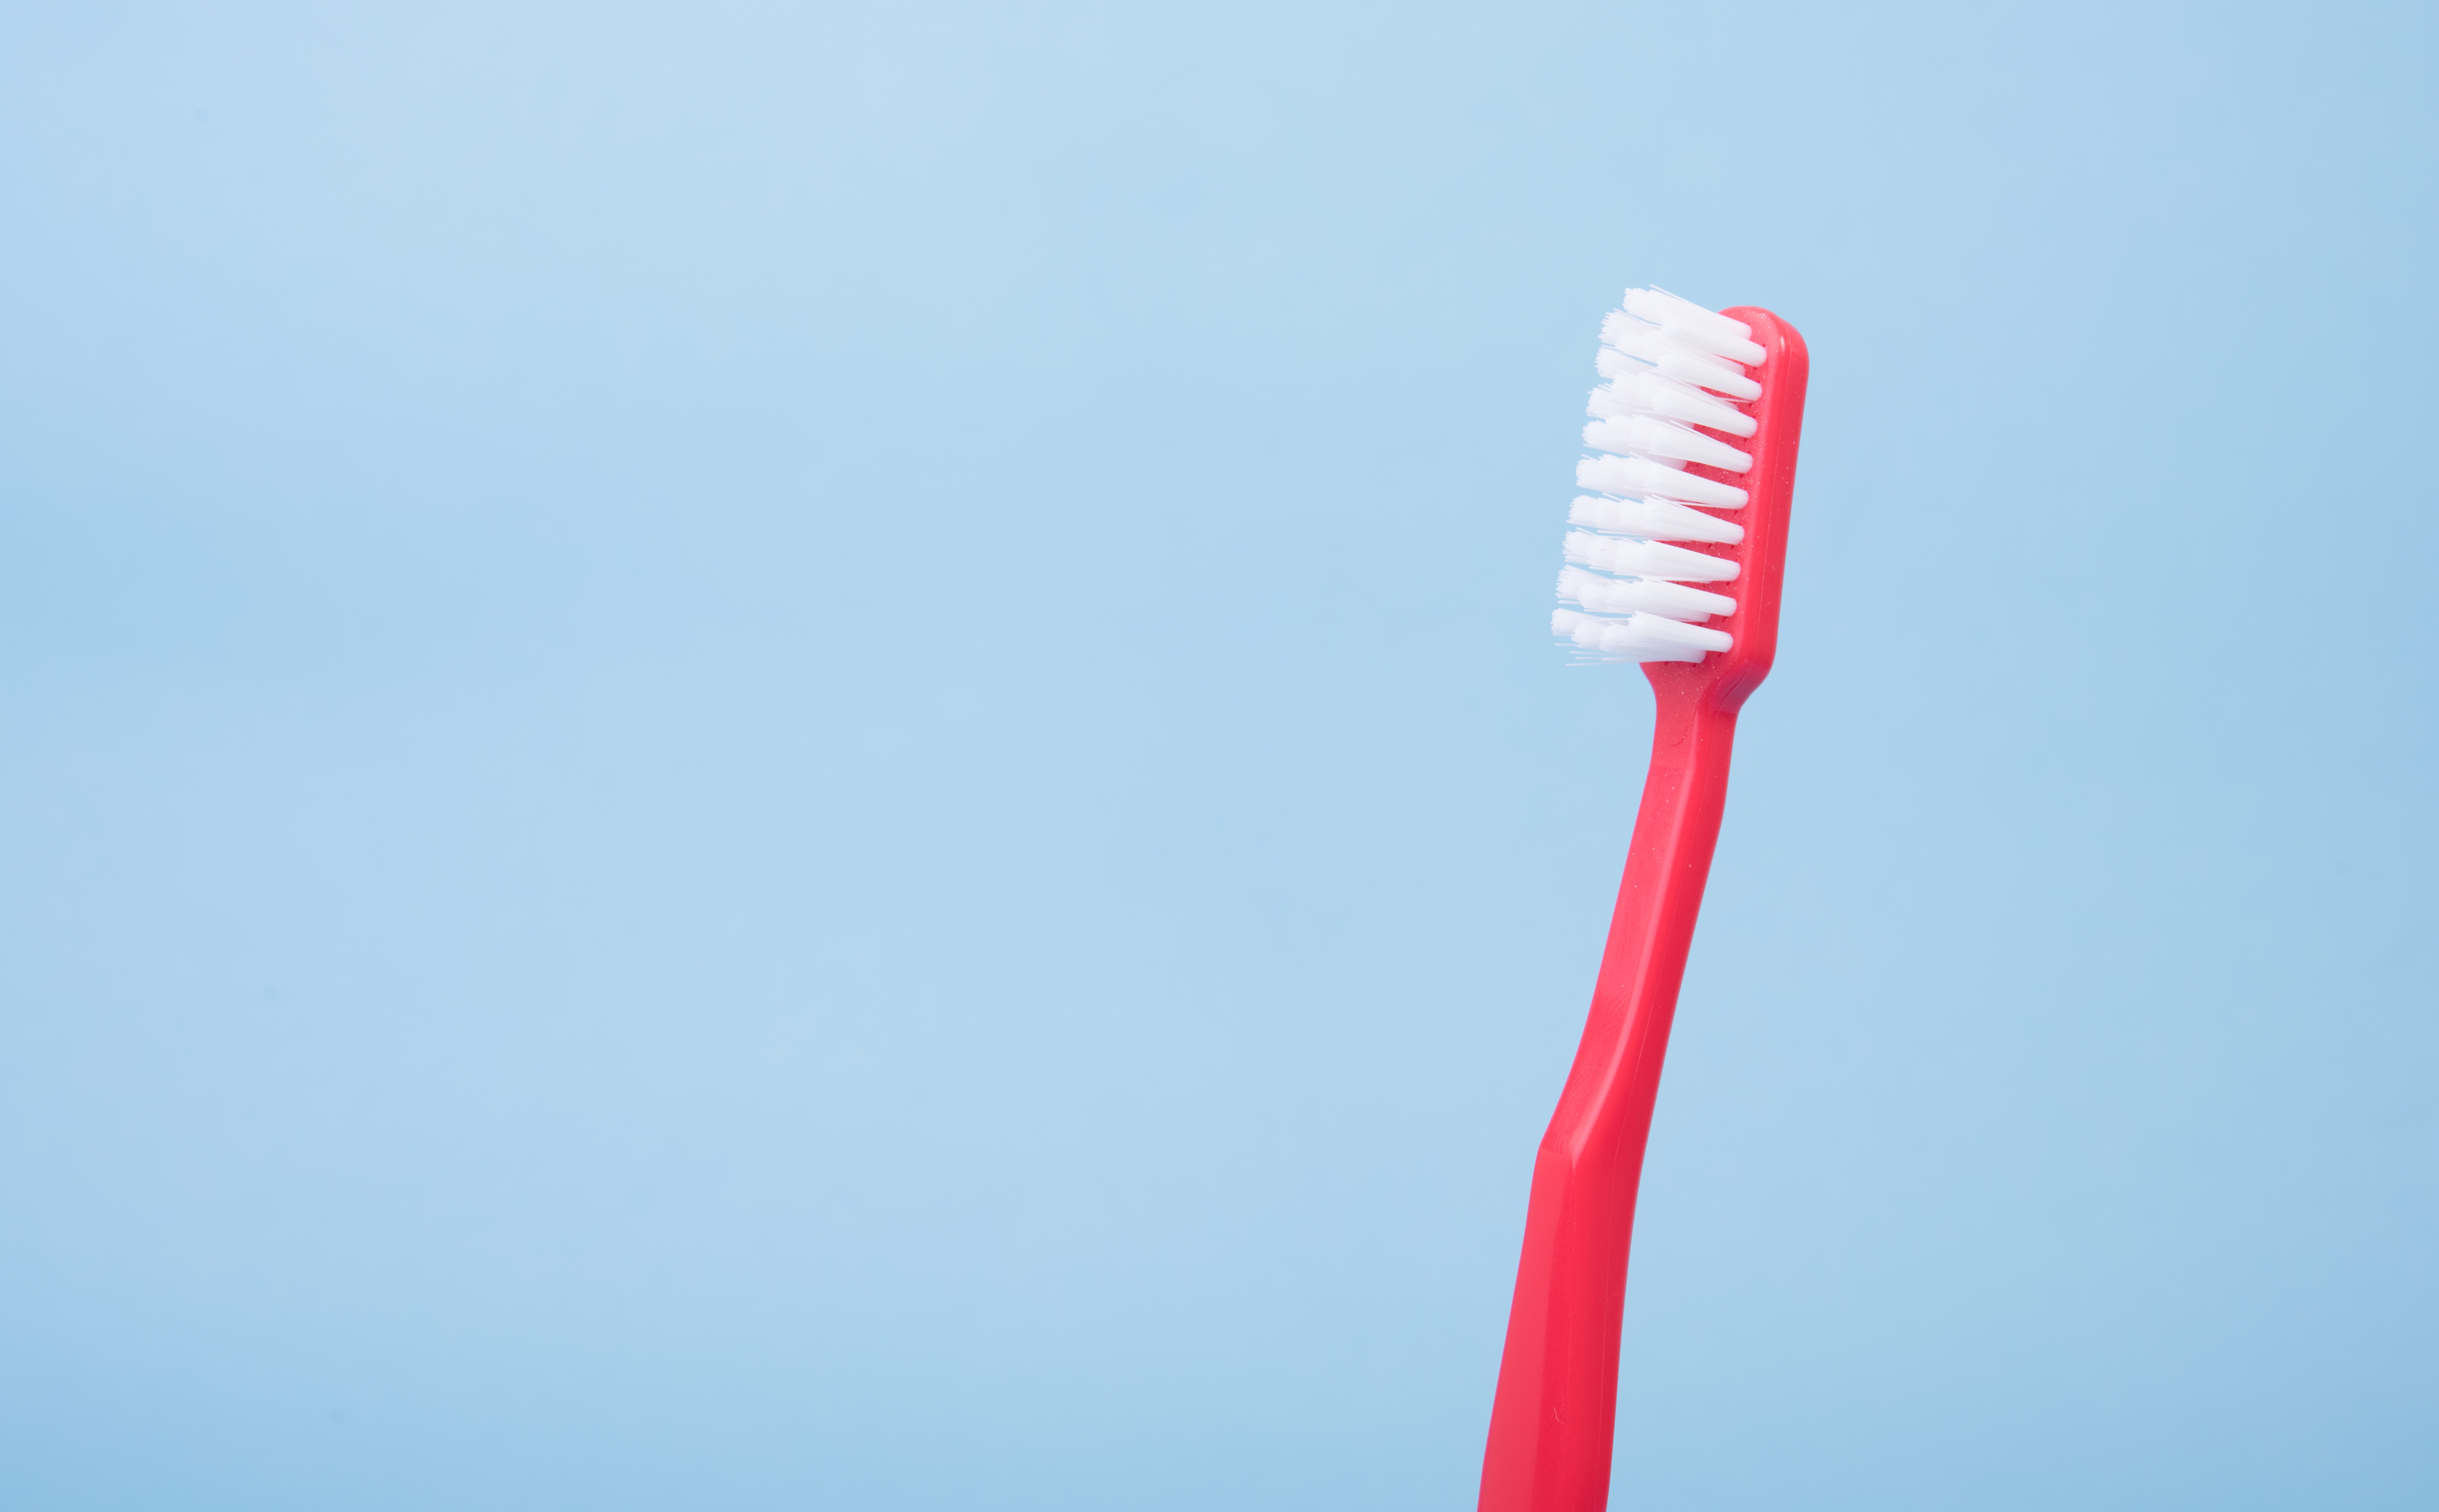 red toothbrush against blue background